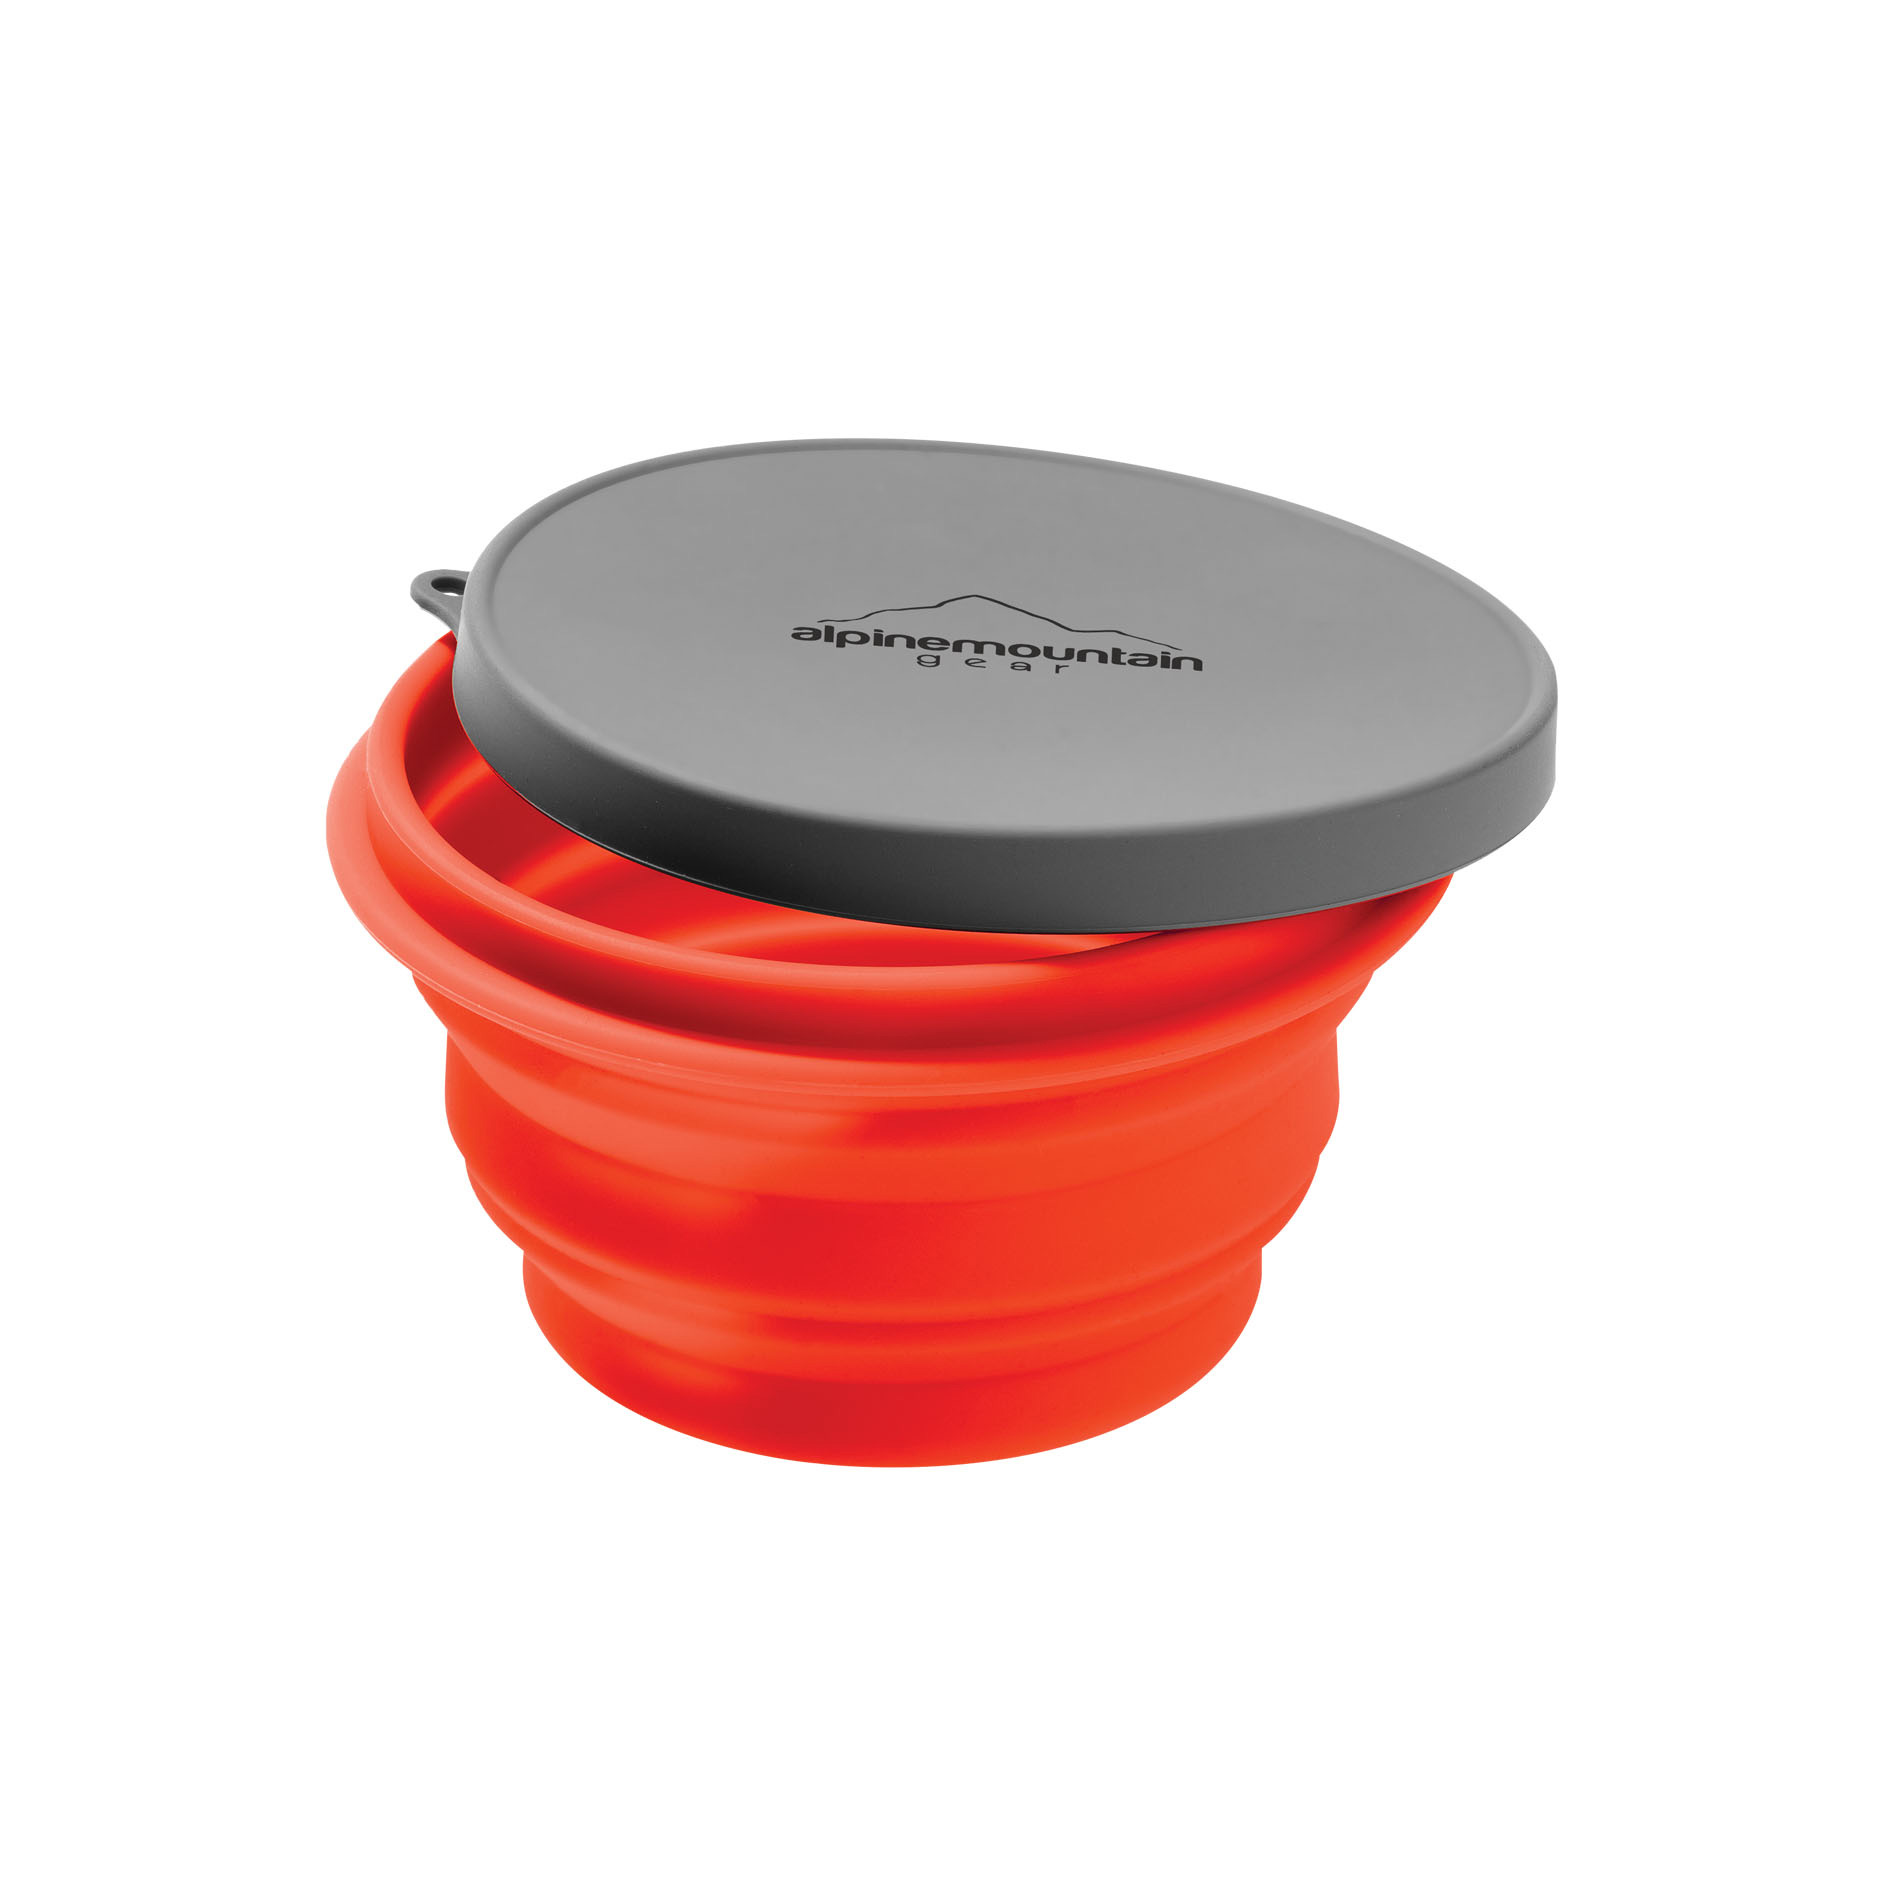 https://op2.0ps.us/original/opplanet-alpine-mountain-gear-small-collapsible-silicone-container-with-lid-and-eyelet-for-hang-main